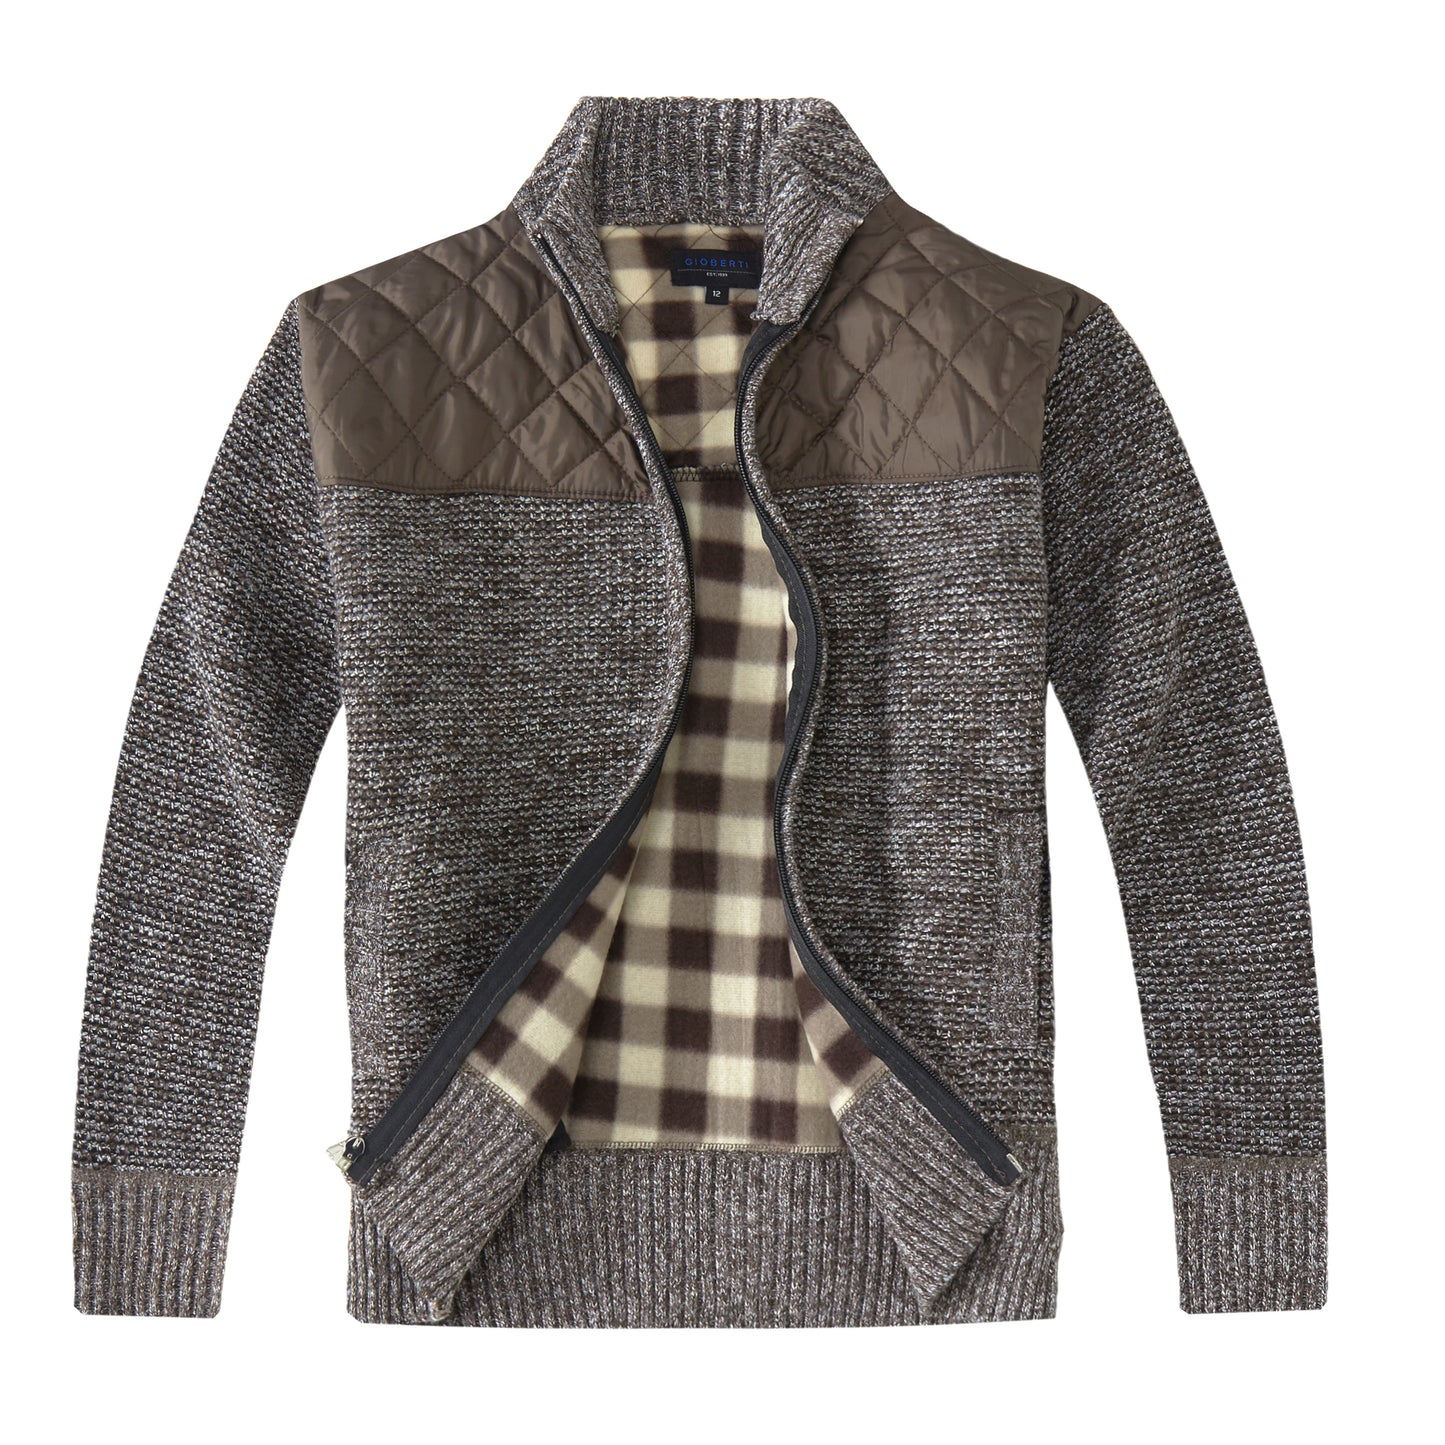 Knitted Full Zip Cardigan Sweater with Soft Brushed Flannel Lining - Coffee